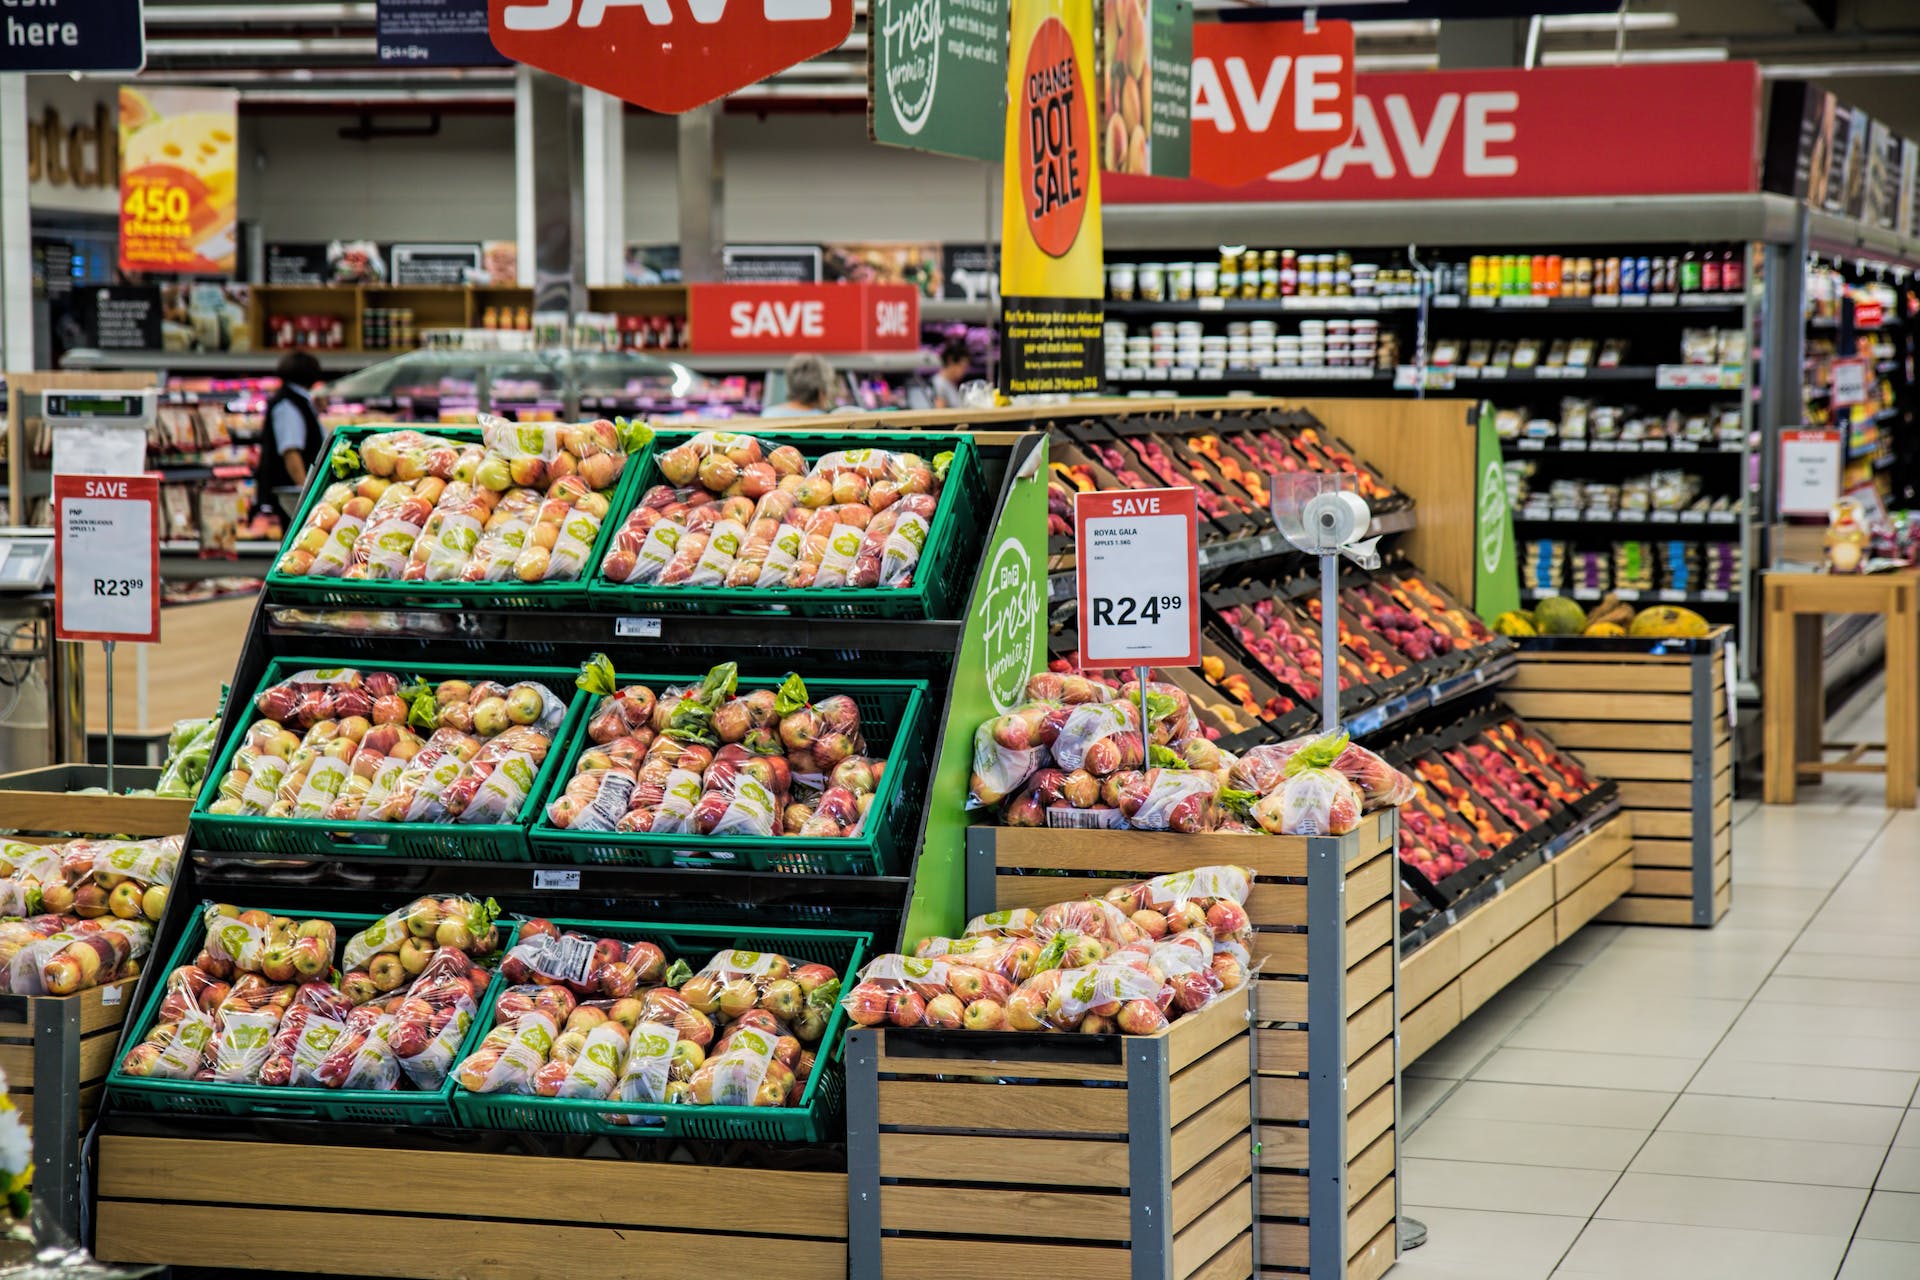 Fruit in a grocery store | Source: Pexels